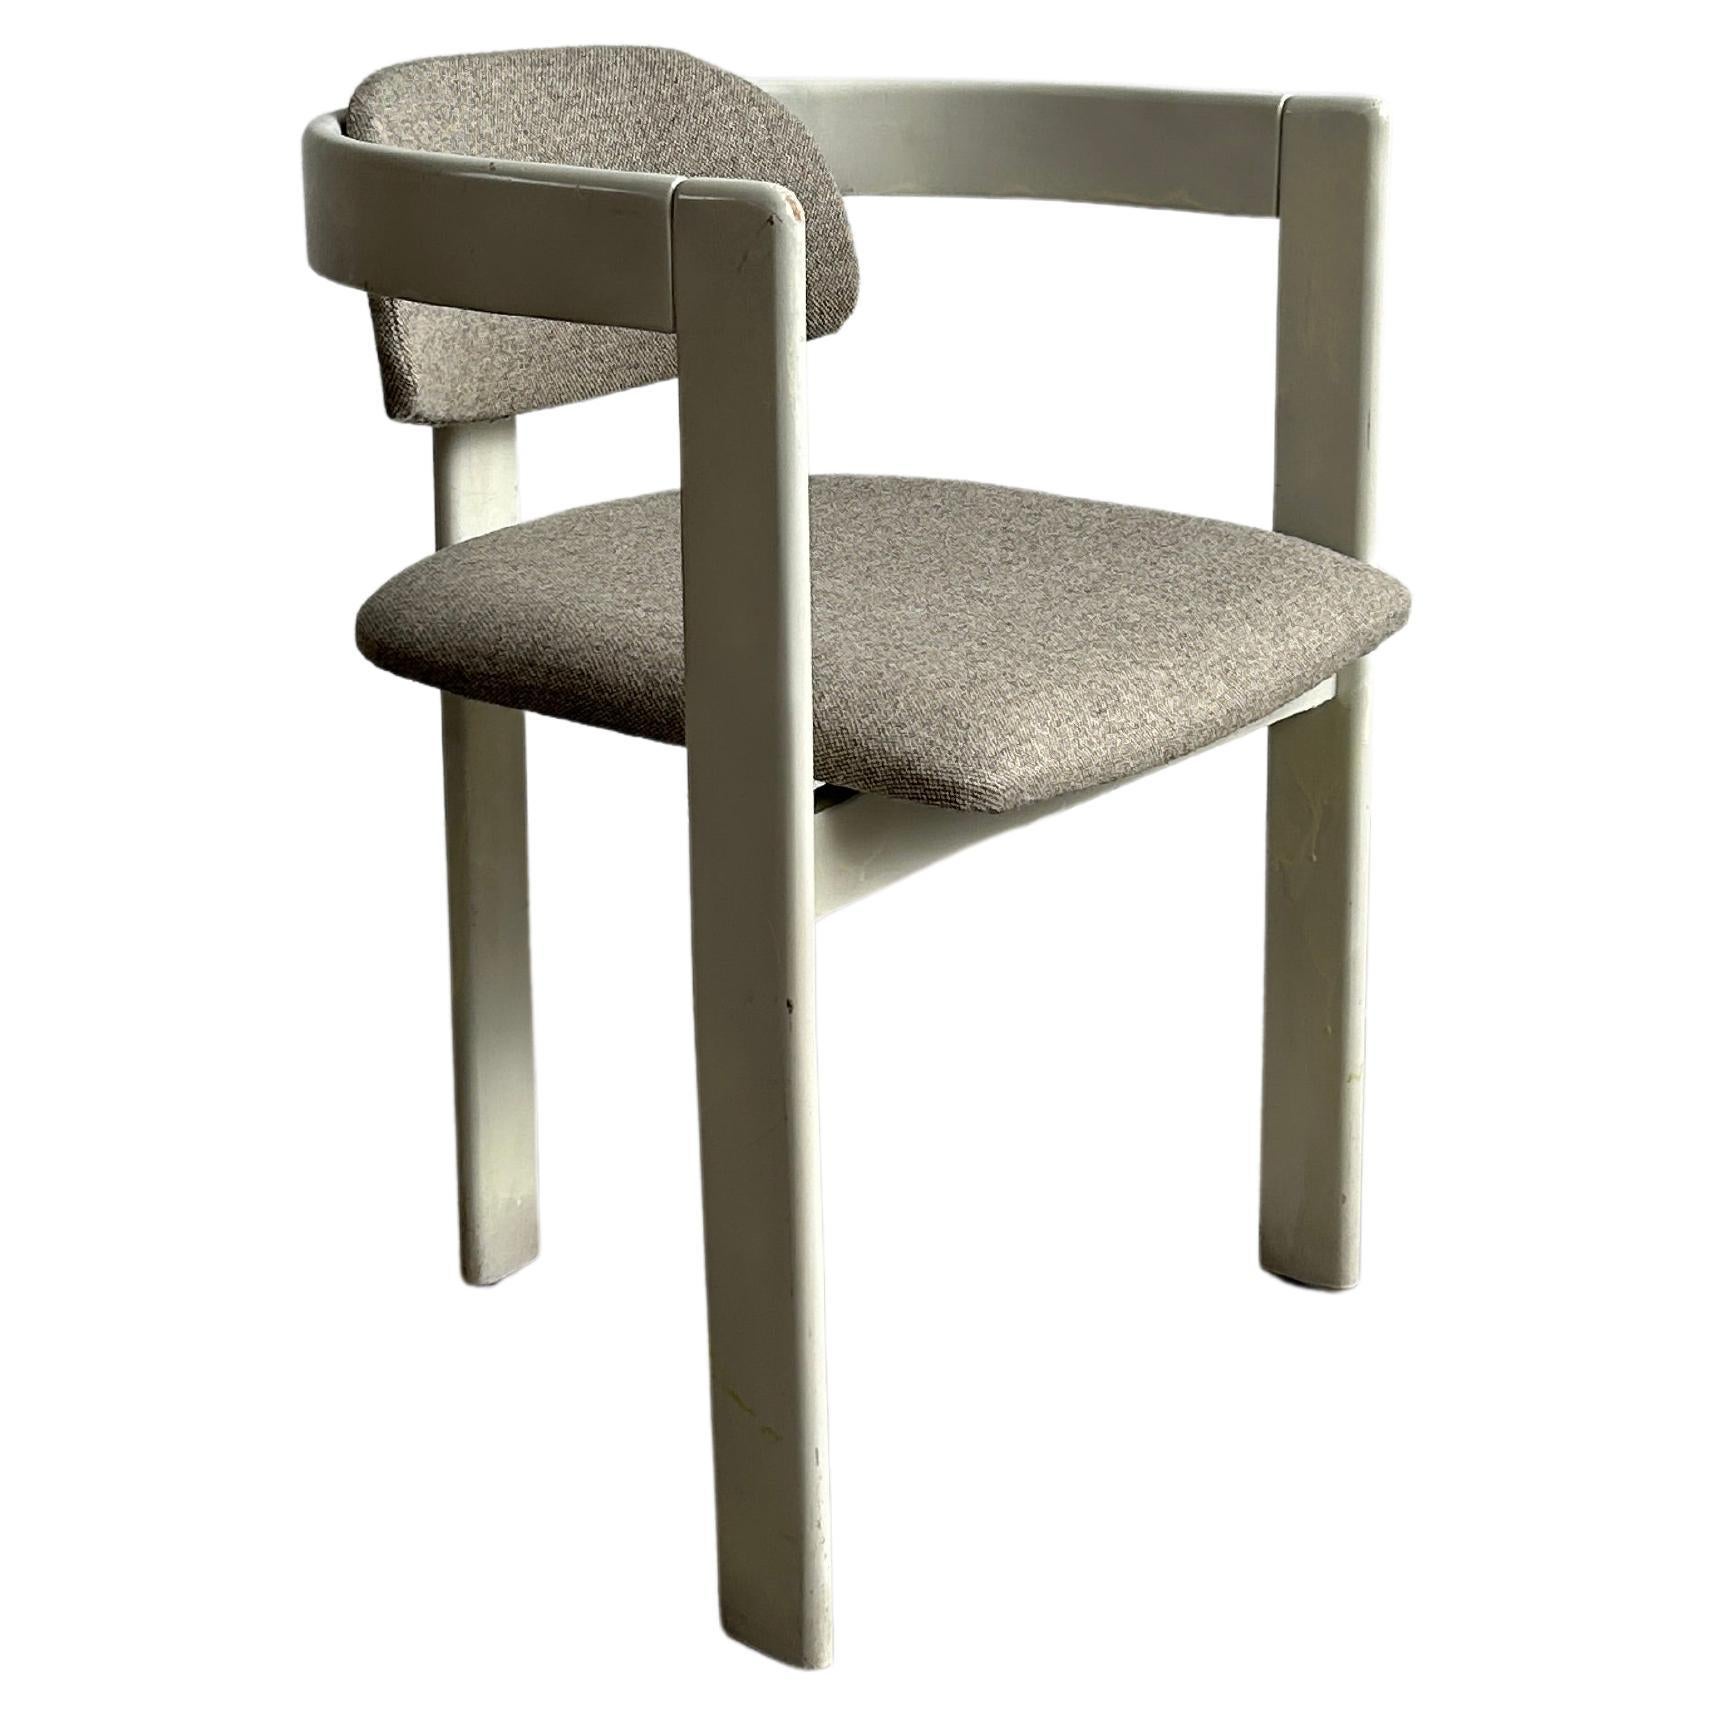 Vintage Dining Chair in Style of 'Pamplona' Chair by Augusto Savini for Pozzi